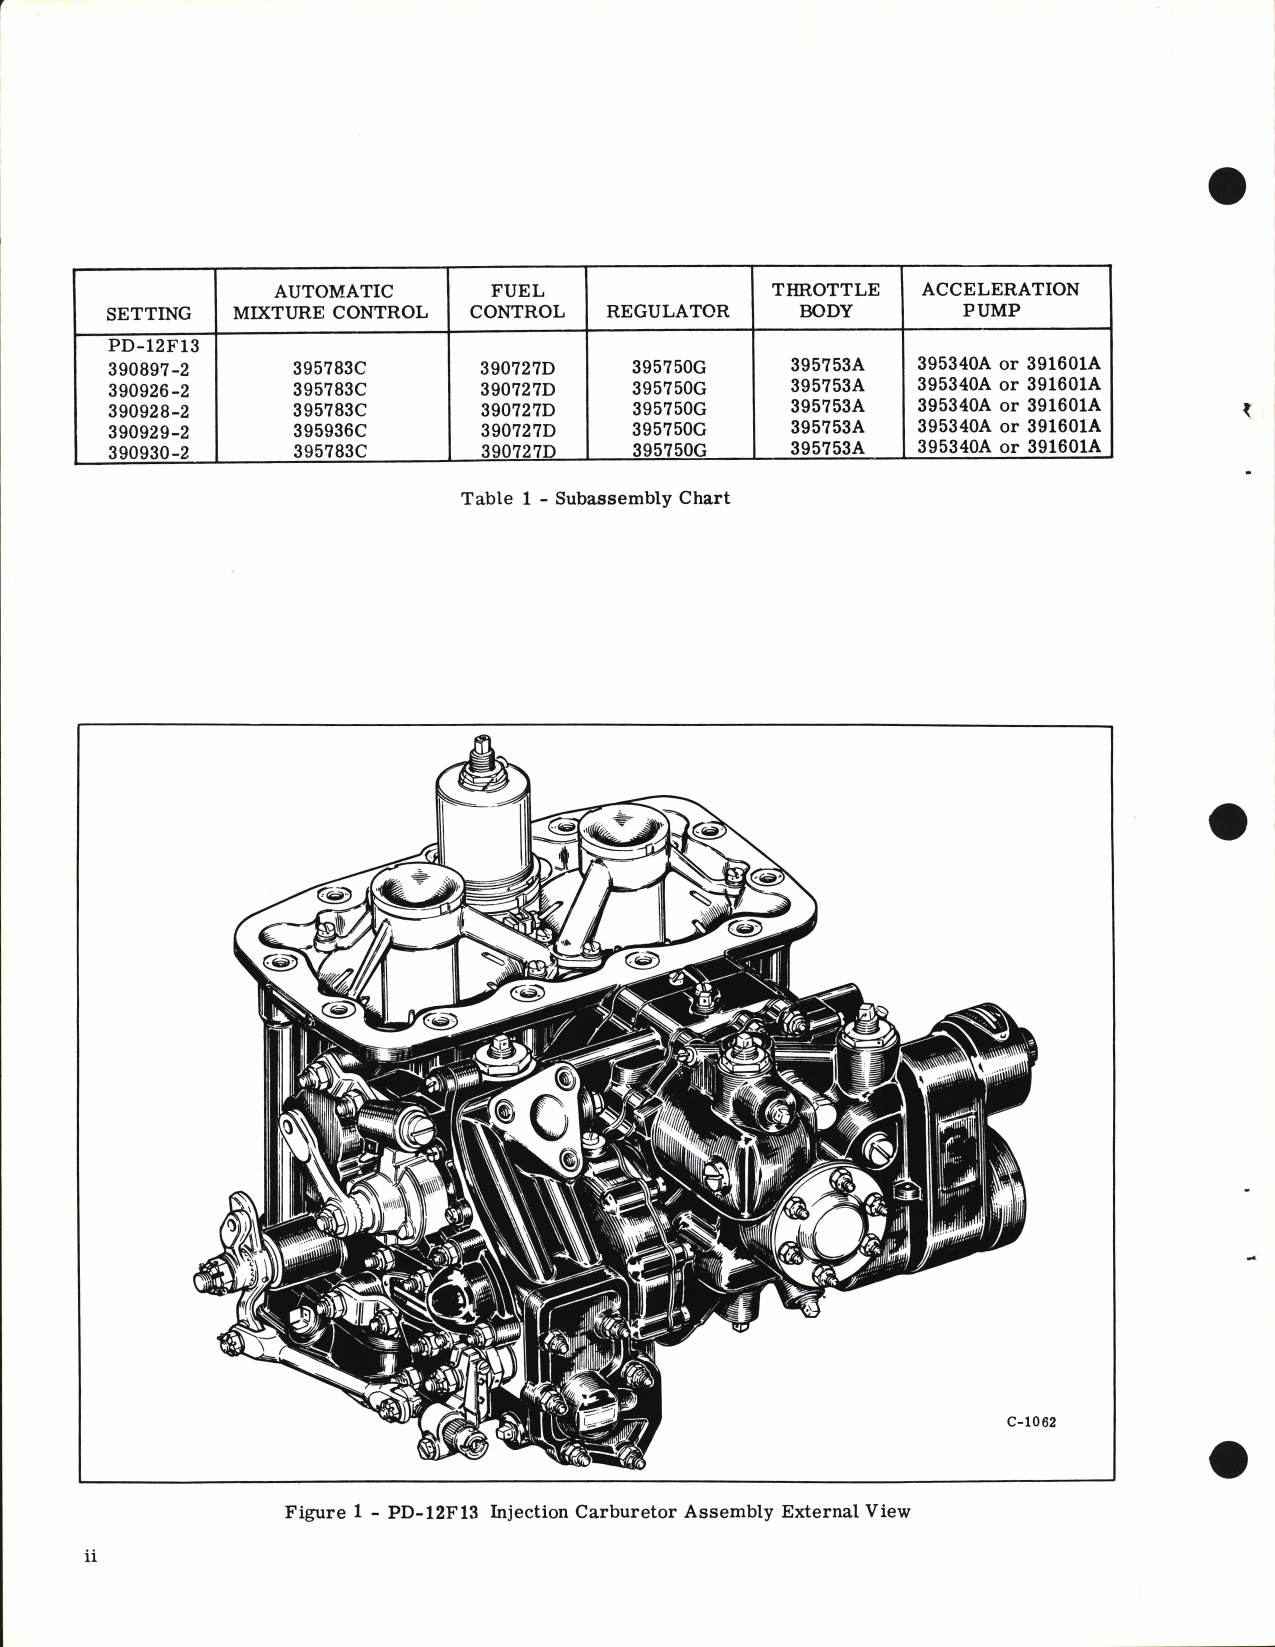 Sample page 5 from AirCorps Library document: Illustrated Parts Breakdown for Stromberg Injection Carburetor Model PD-12F13